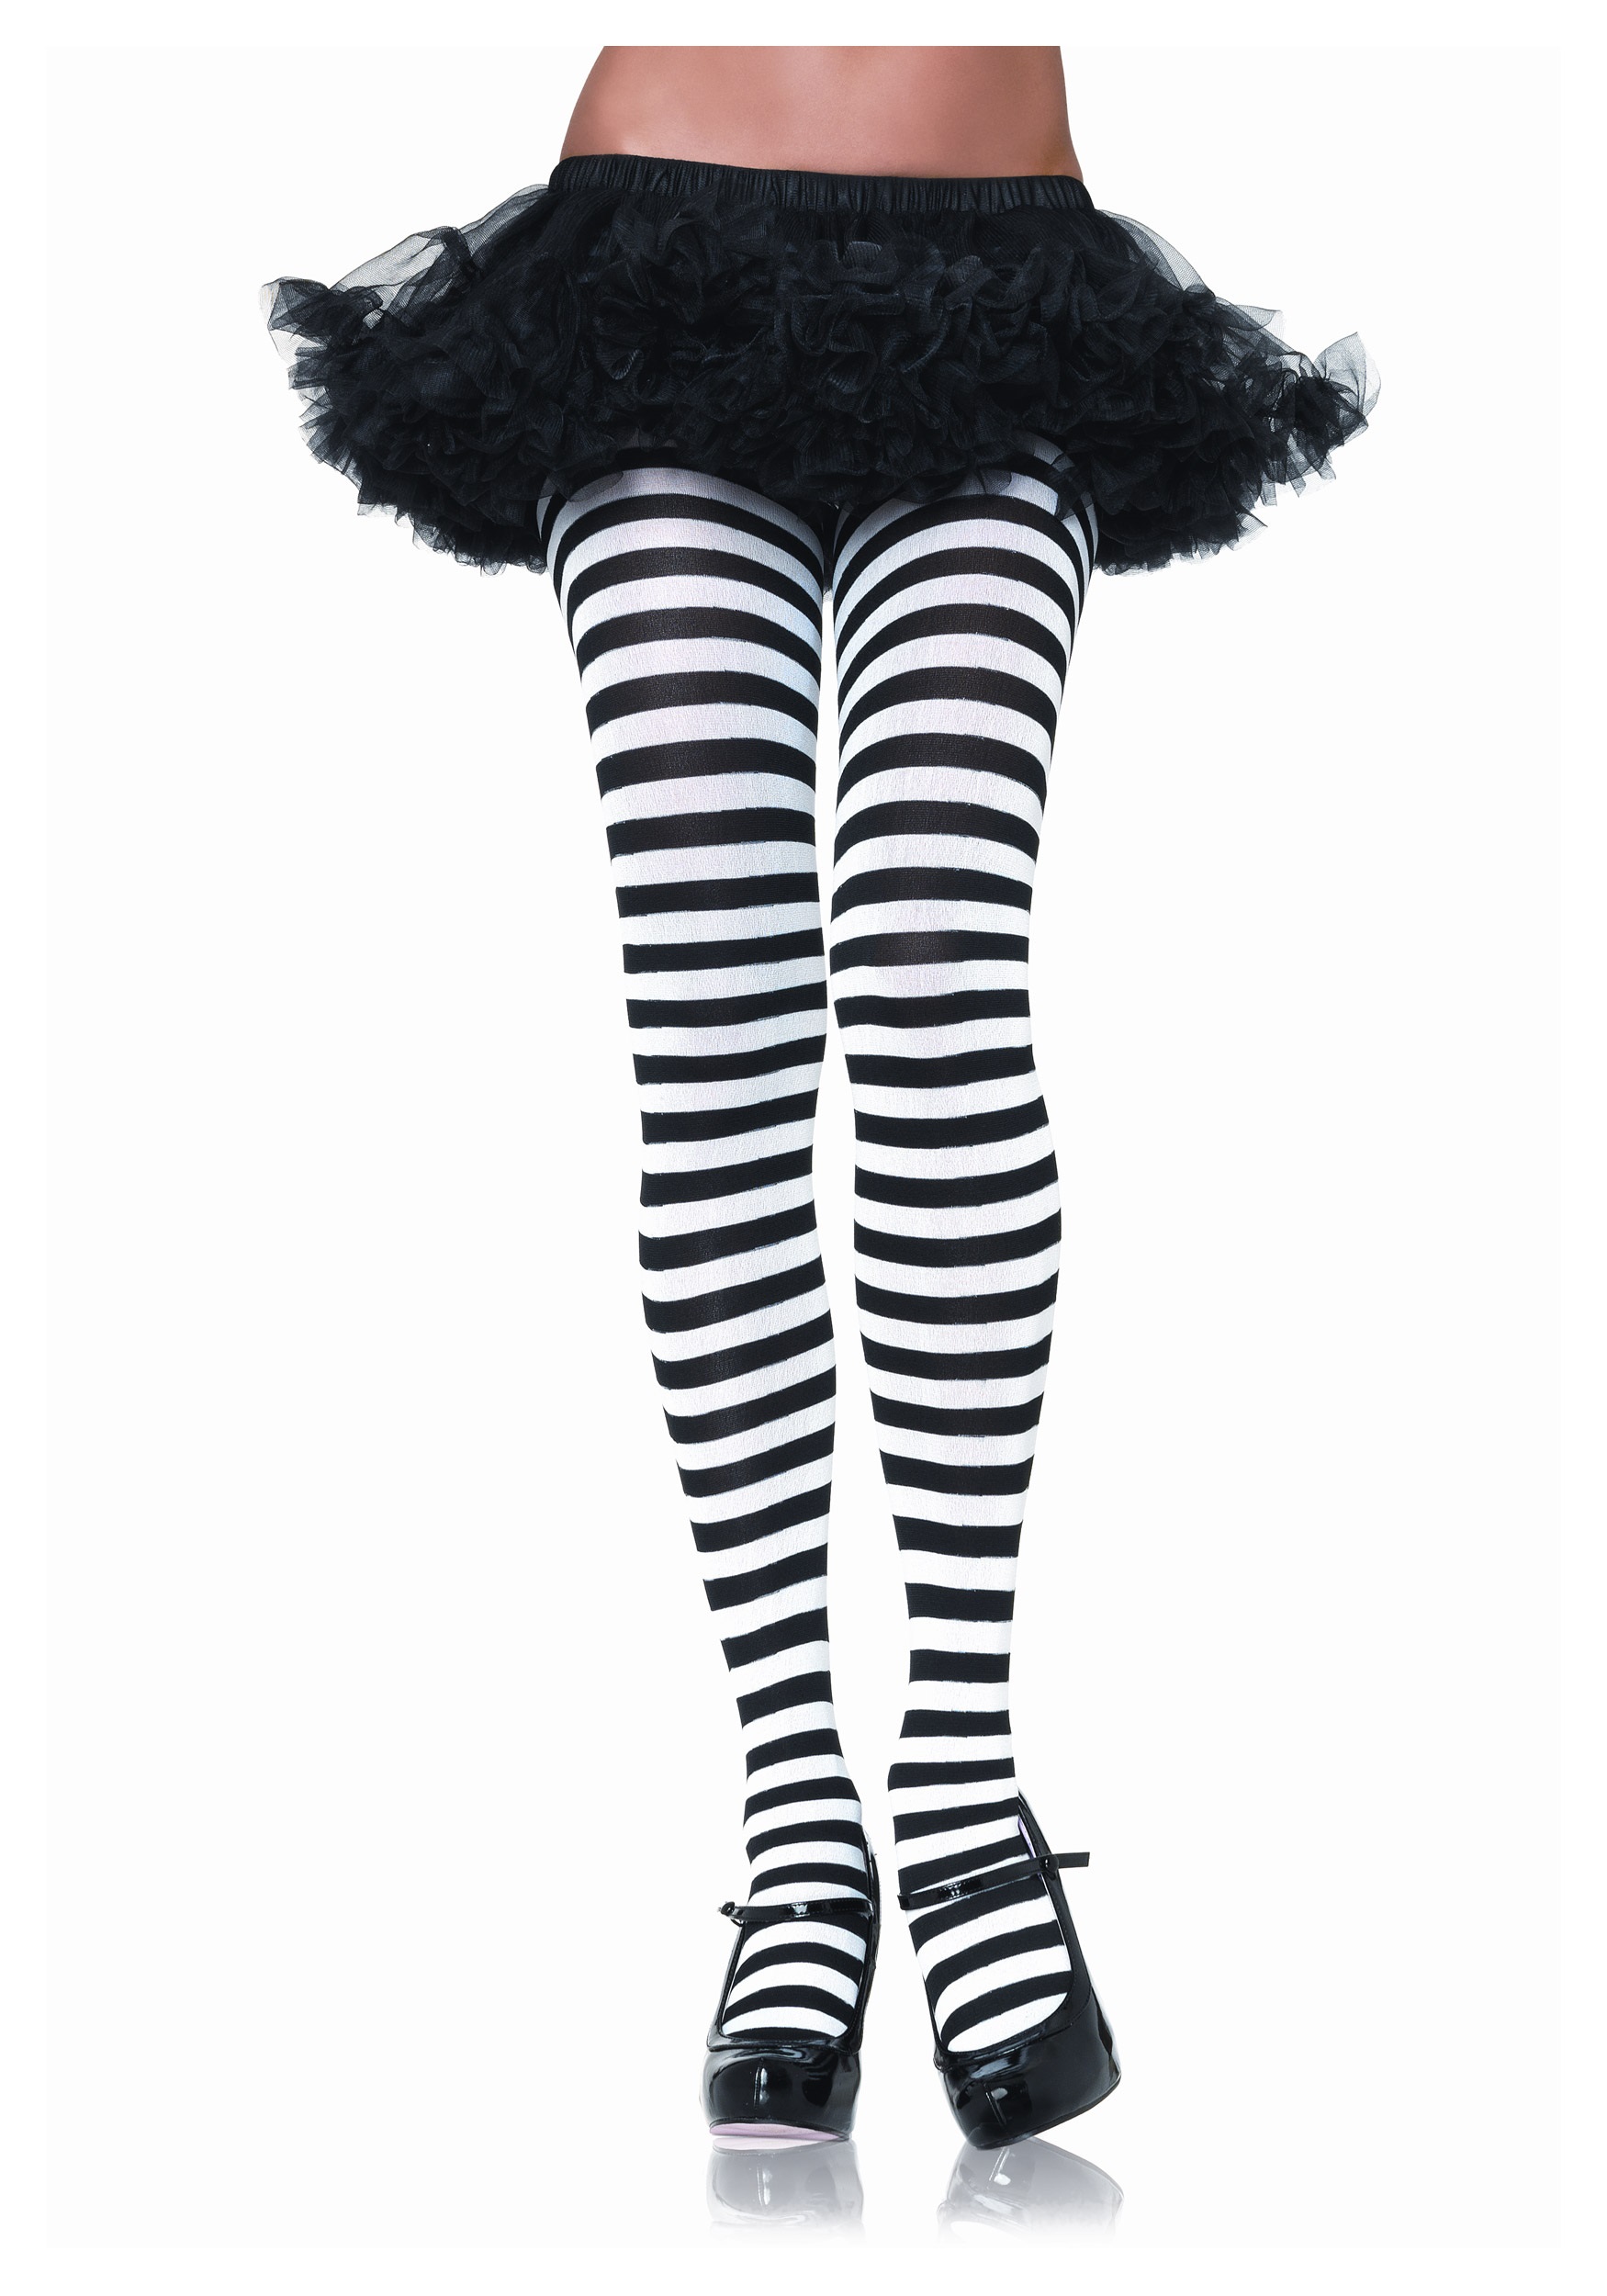 White and Black Striped Tights